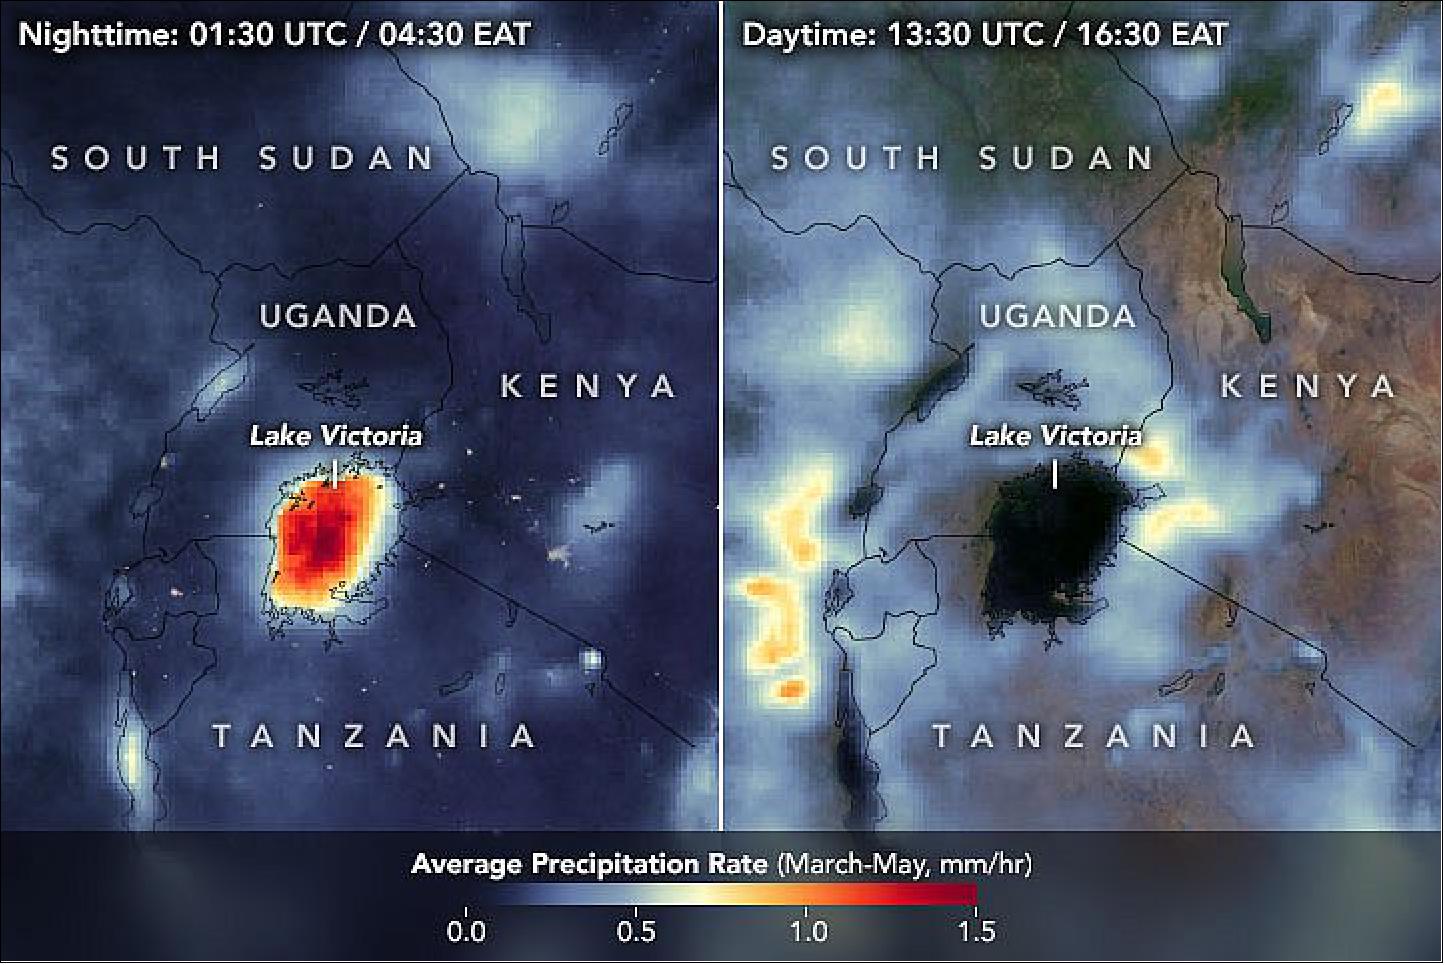 Figure 22: In the animation, precipitation peaks over land at around 4:30 pm EAT (16:30 hr) local time, when thunderstorms are typically most active due to afternoon surface heating from the Sun. Rainfall is particularly apparent to the northeast and west of Lake Victoria, where mountain ranges also help drive the upward motion of warm air masses (image credit: NASA Earth Observatory)